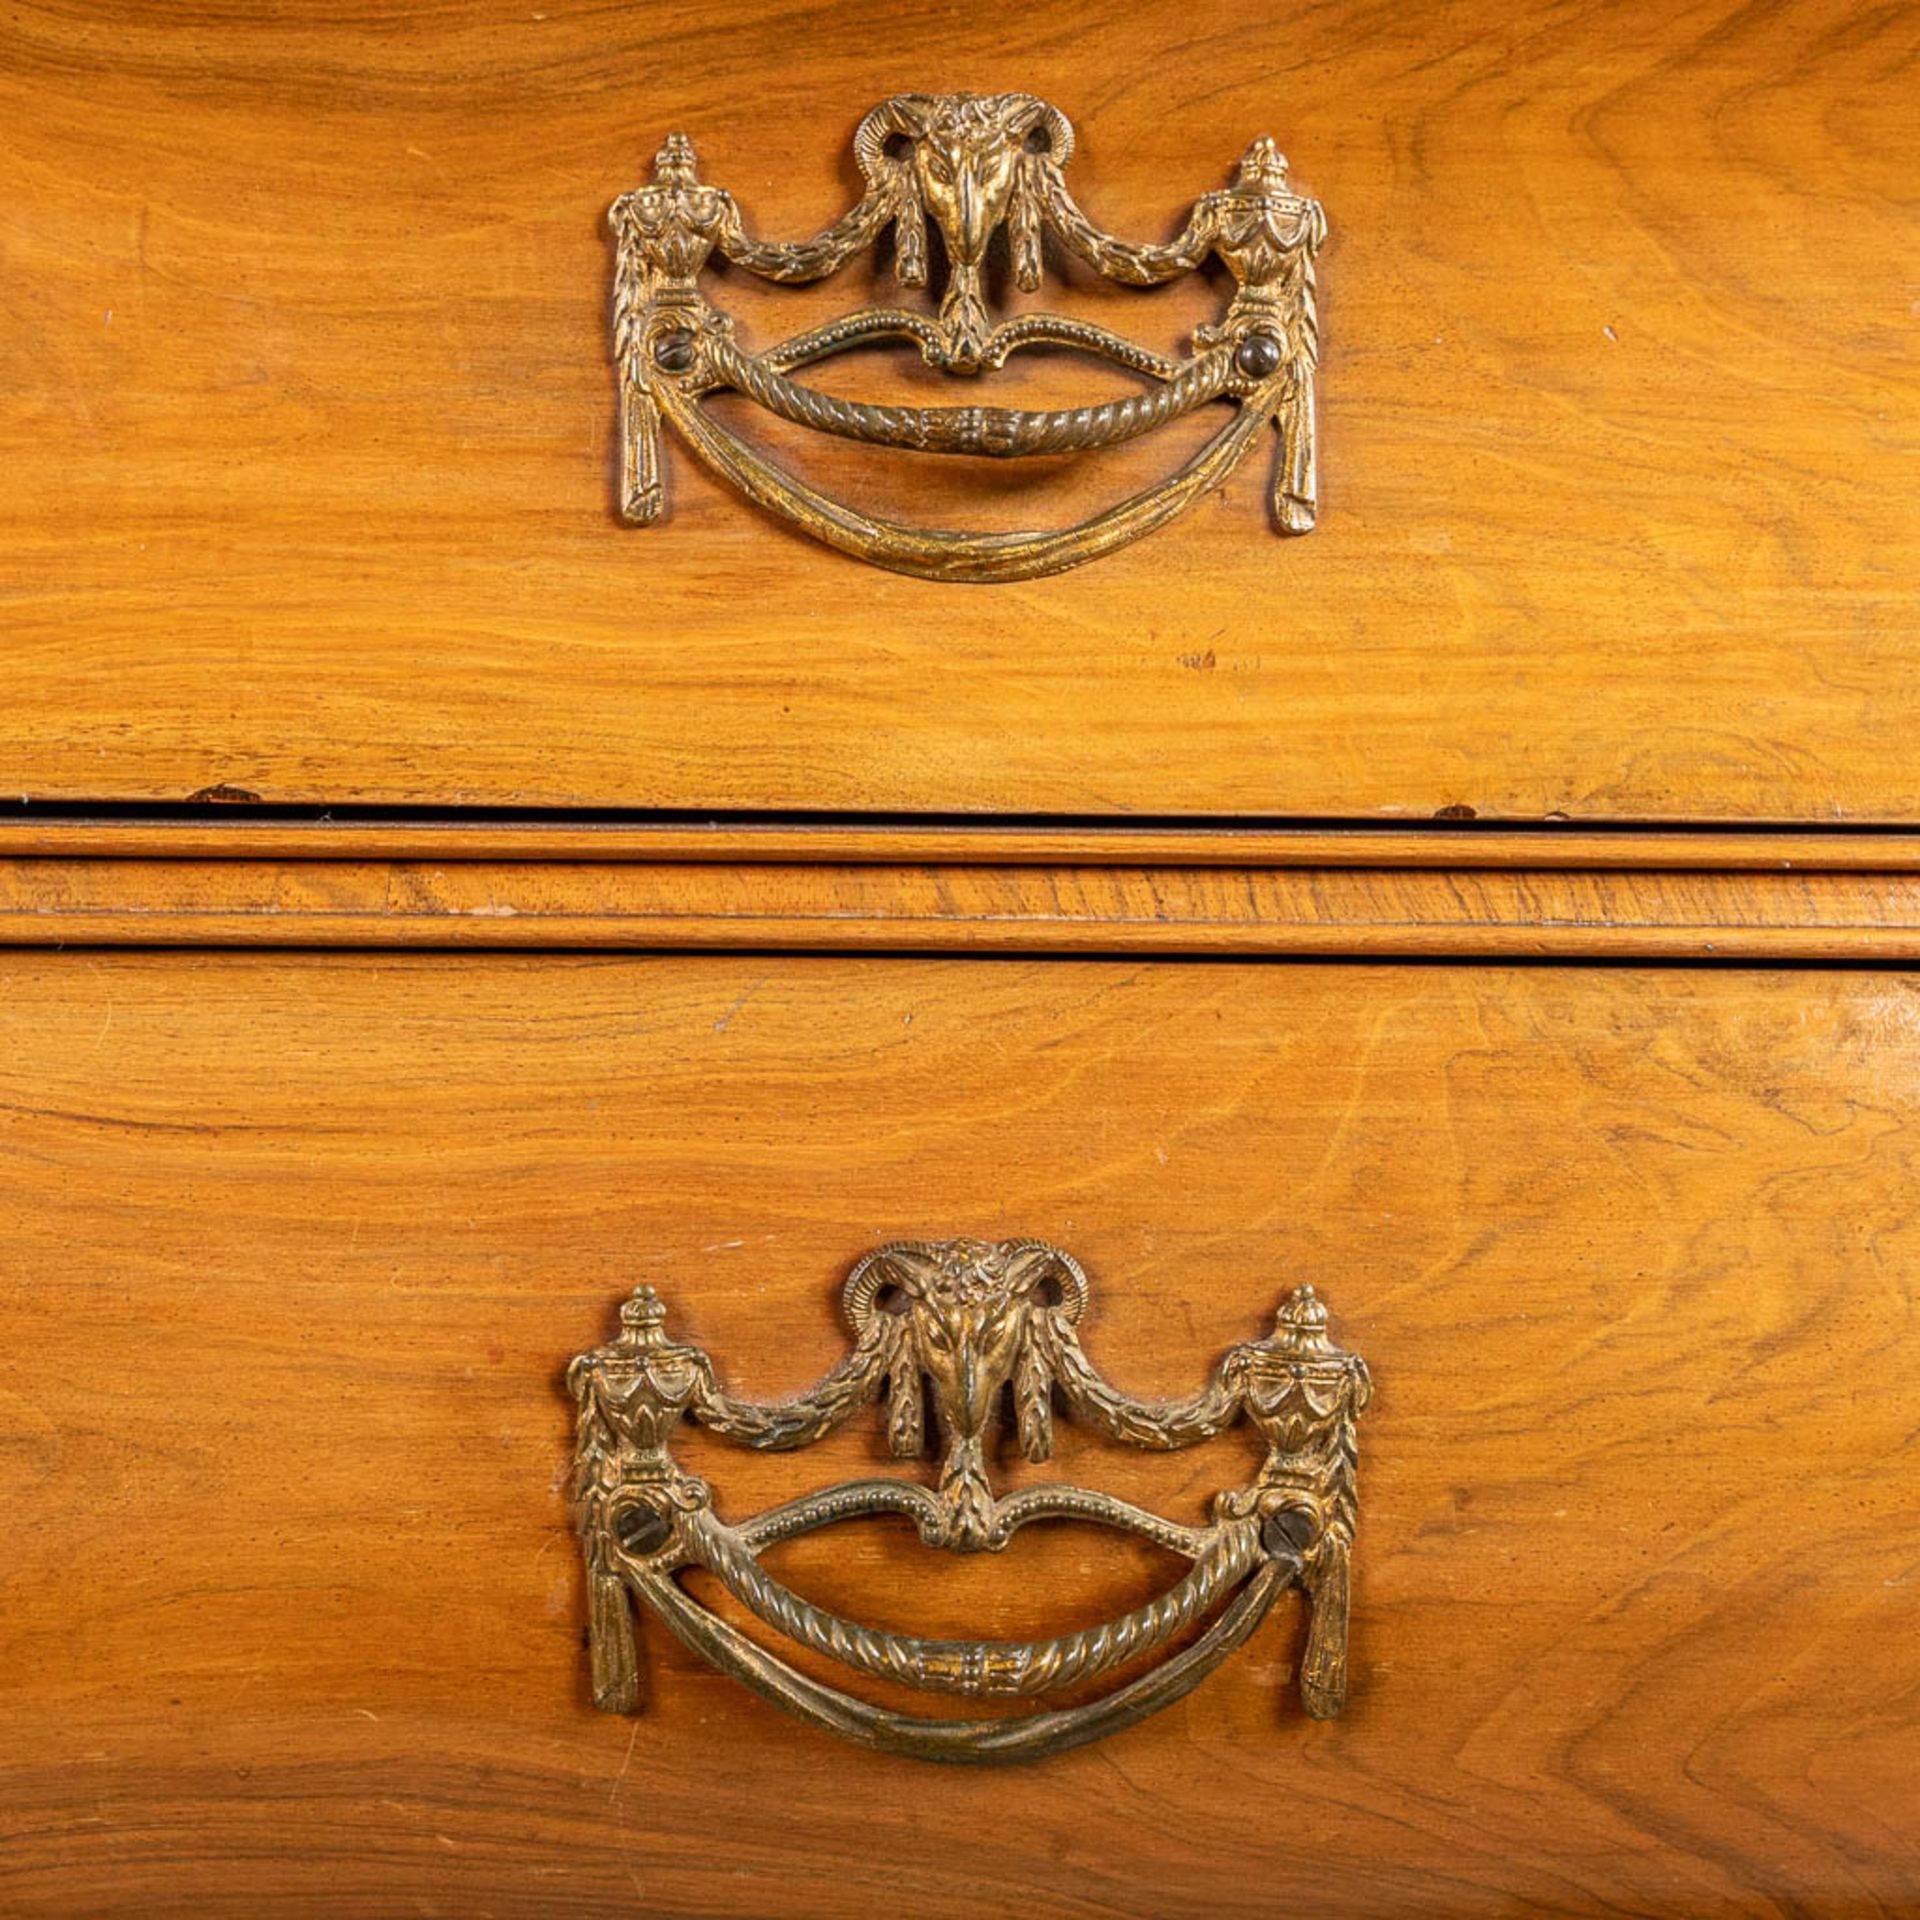 A Dutch cabinet decorated with medallions and wood sculptures - Image 16 of 16